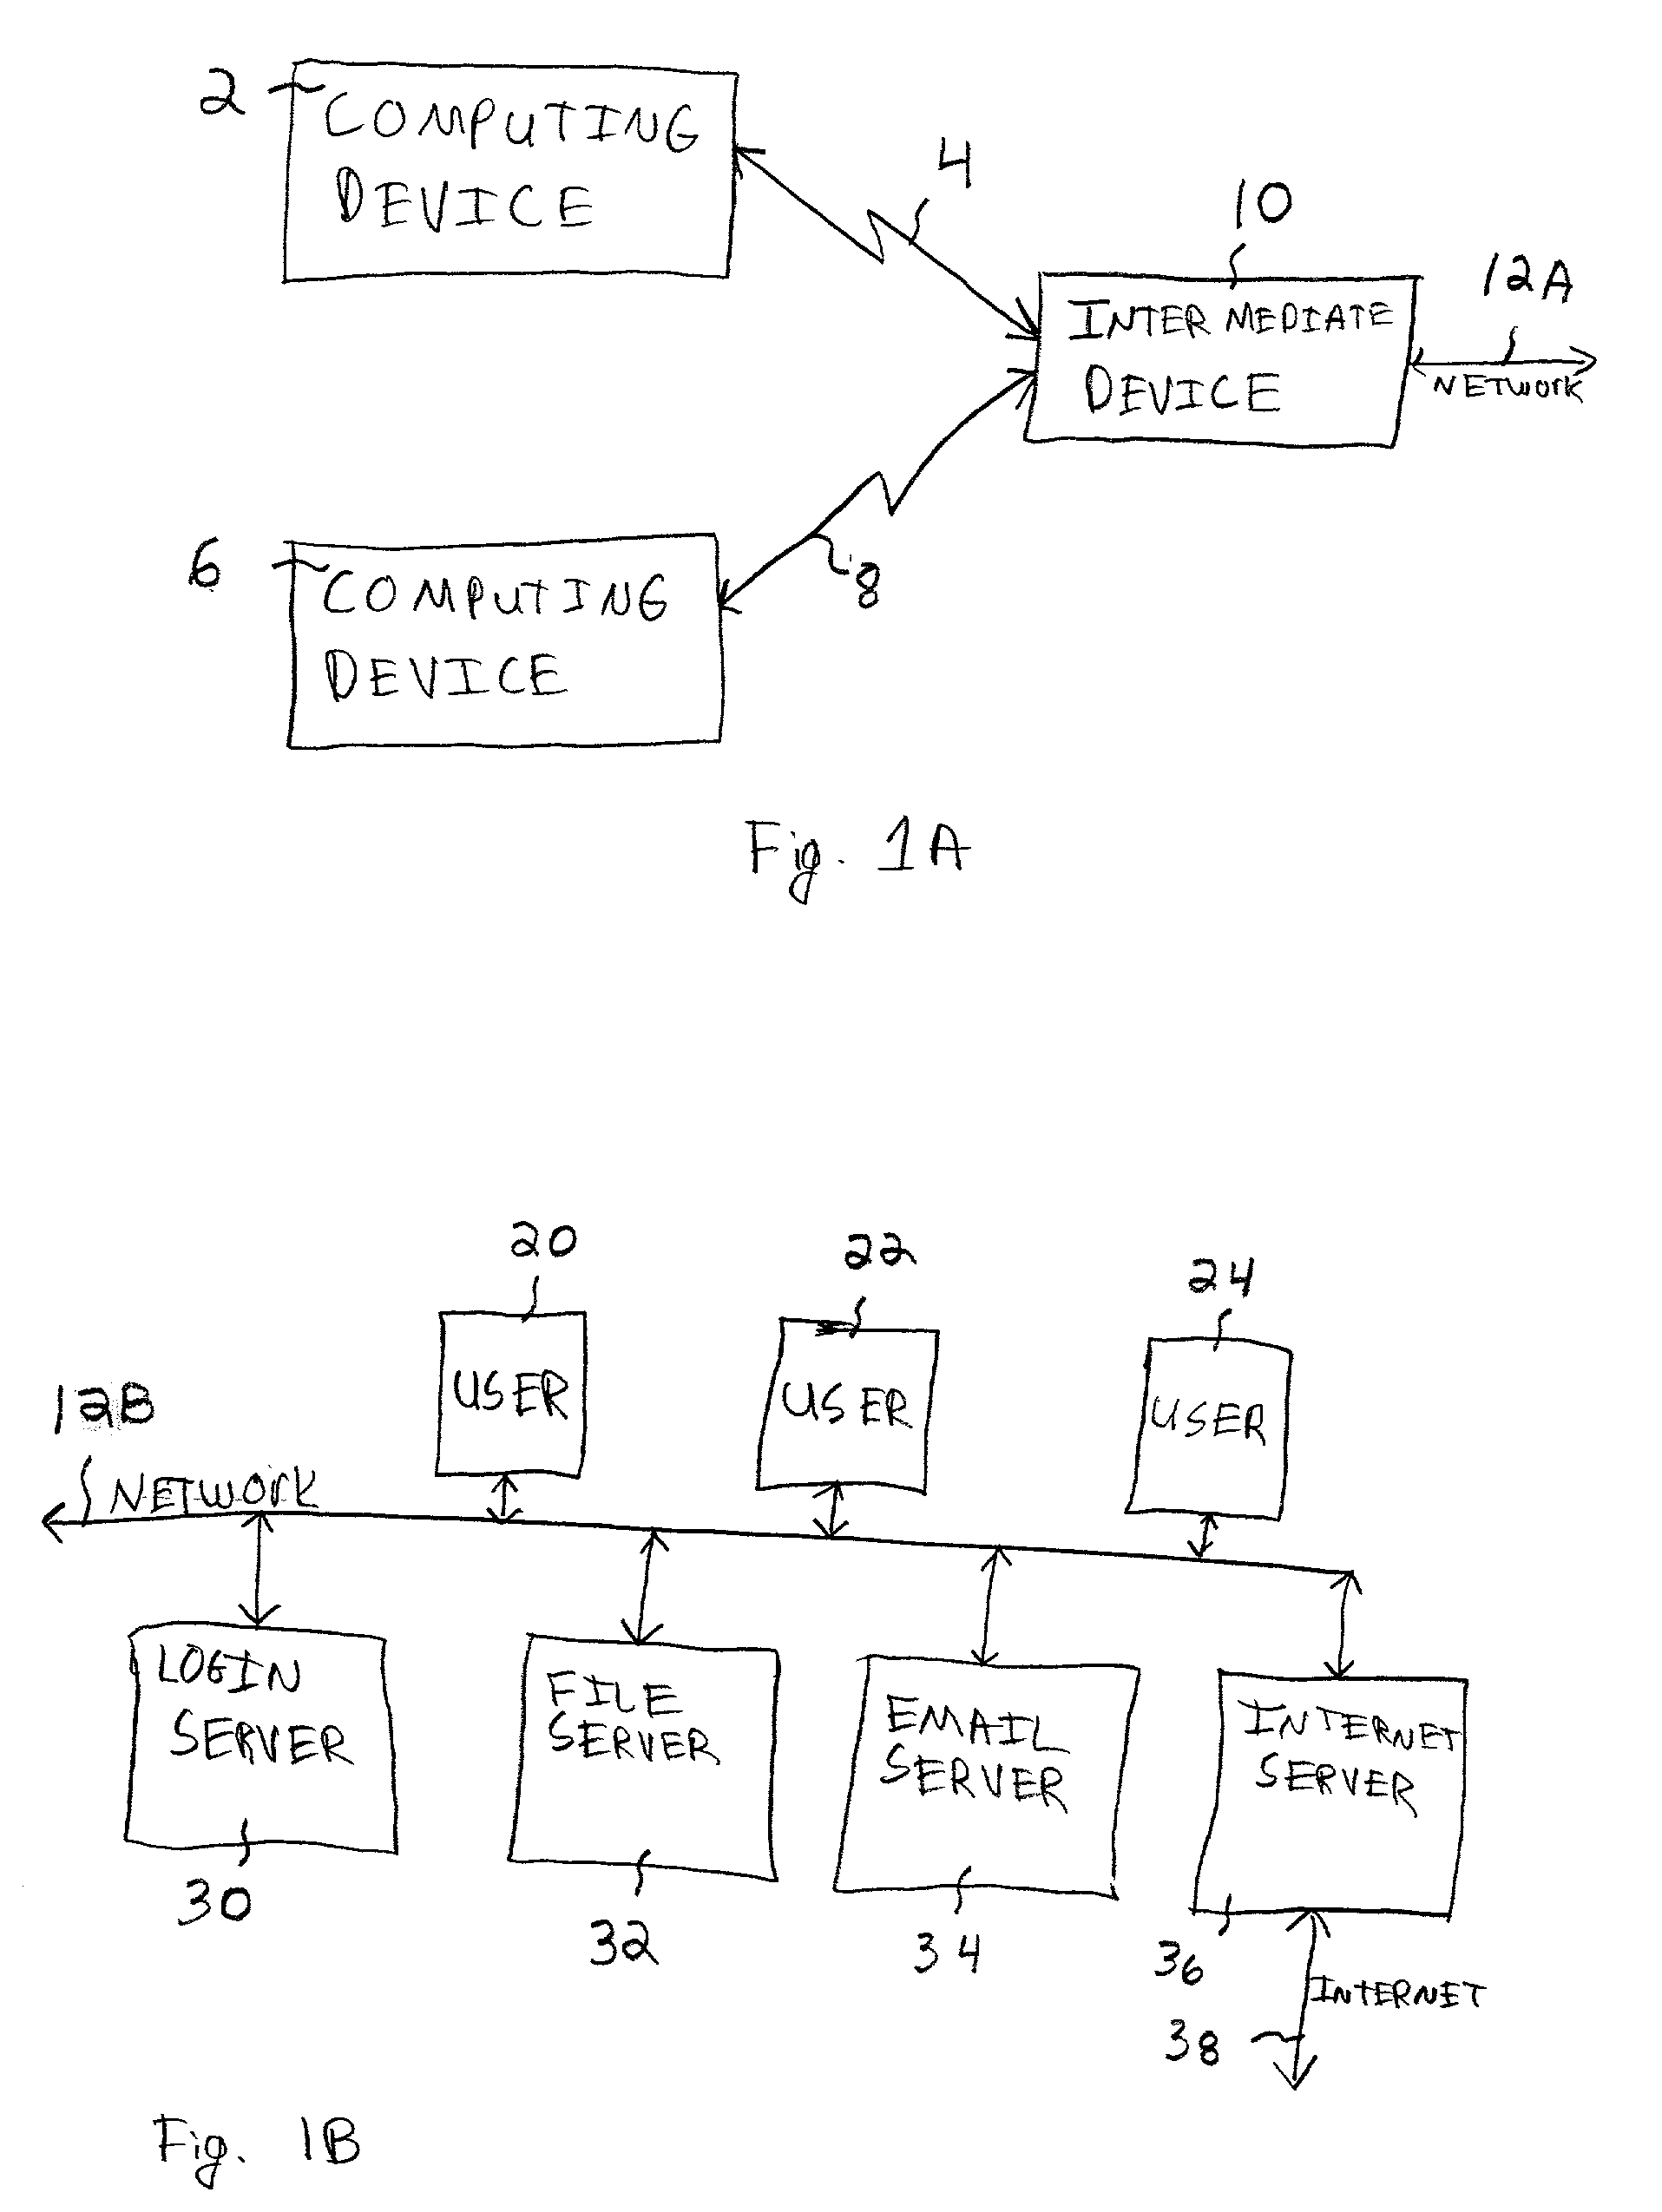 Method and system for controlling access to network resources based on connection security